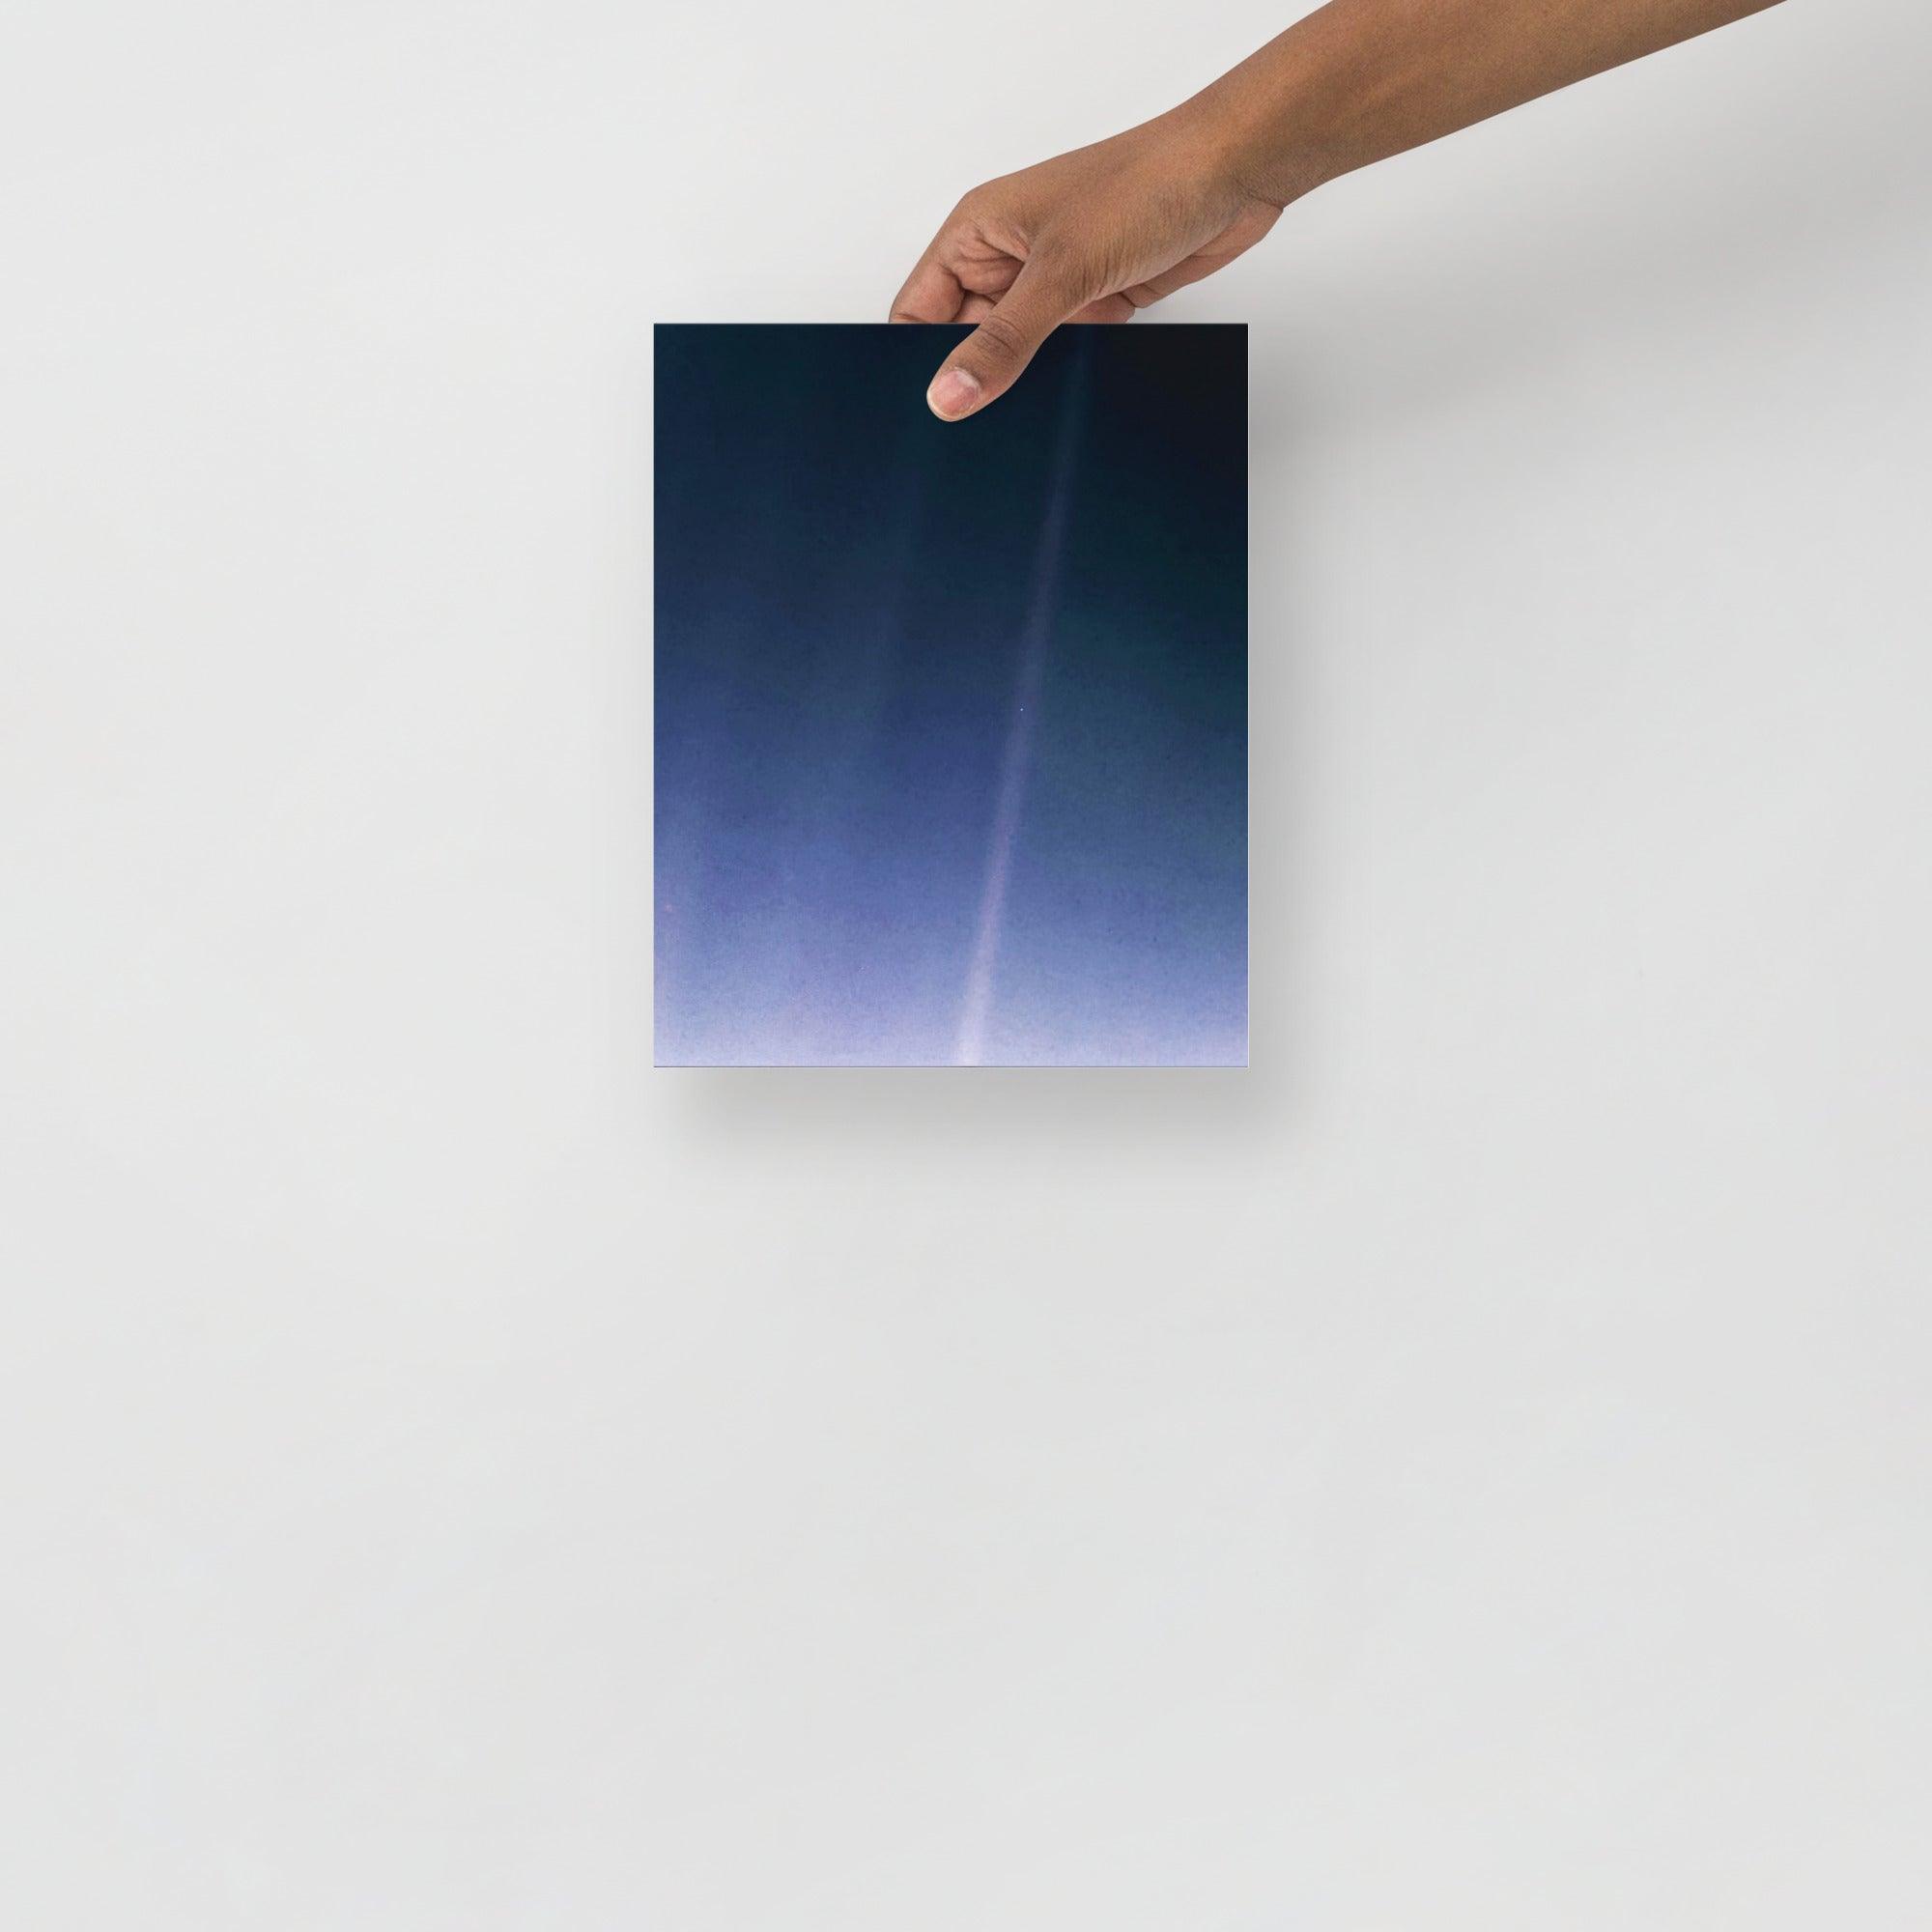 A Pale Blue Dot poster on a plain backdrop in size 8x10”.